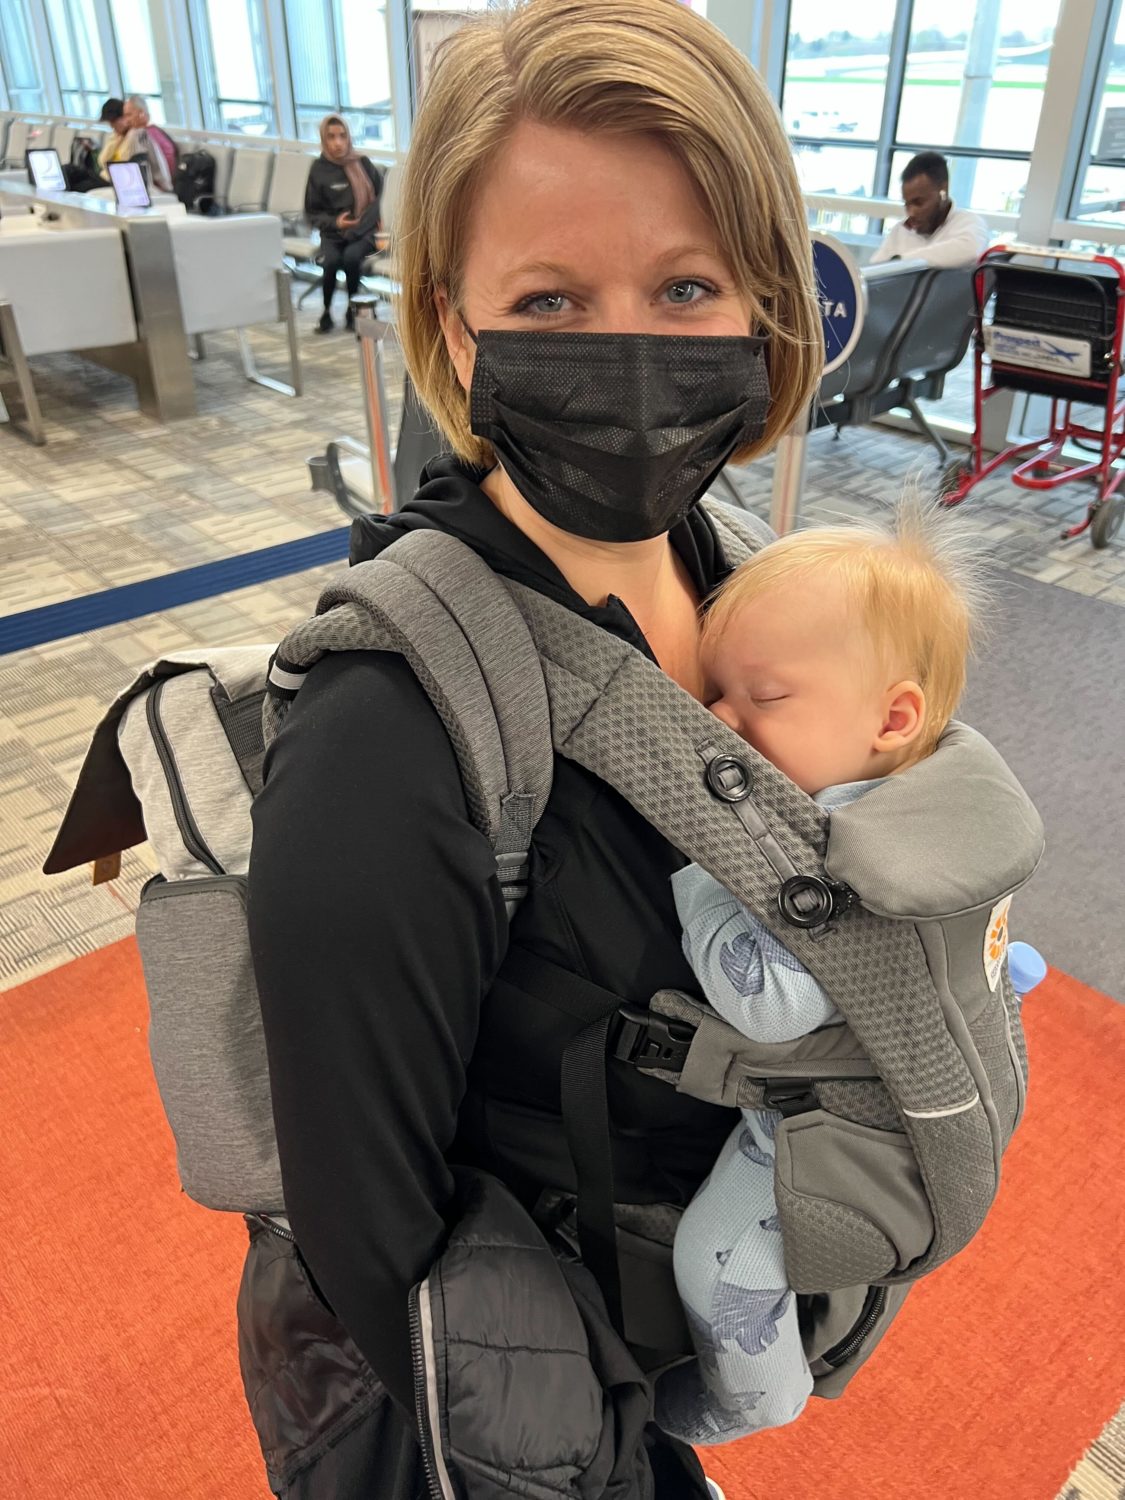 Traveling in the airport with a baby.